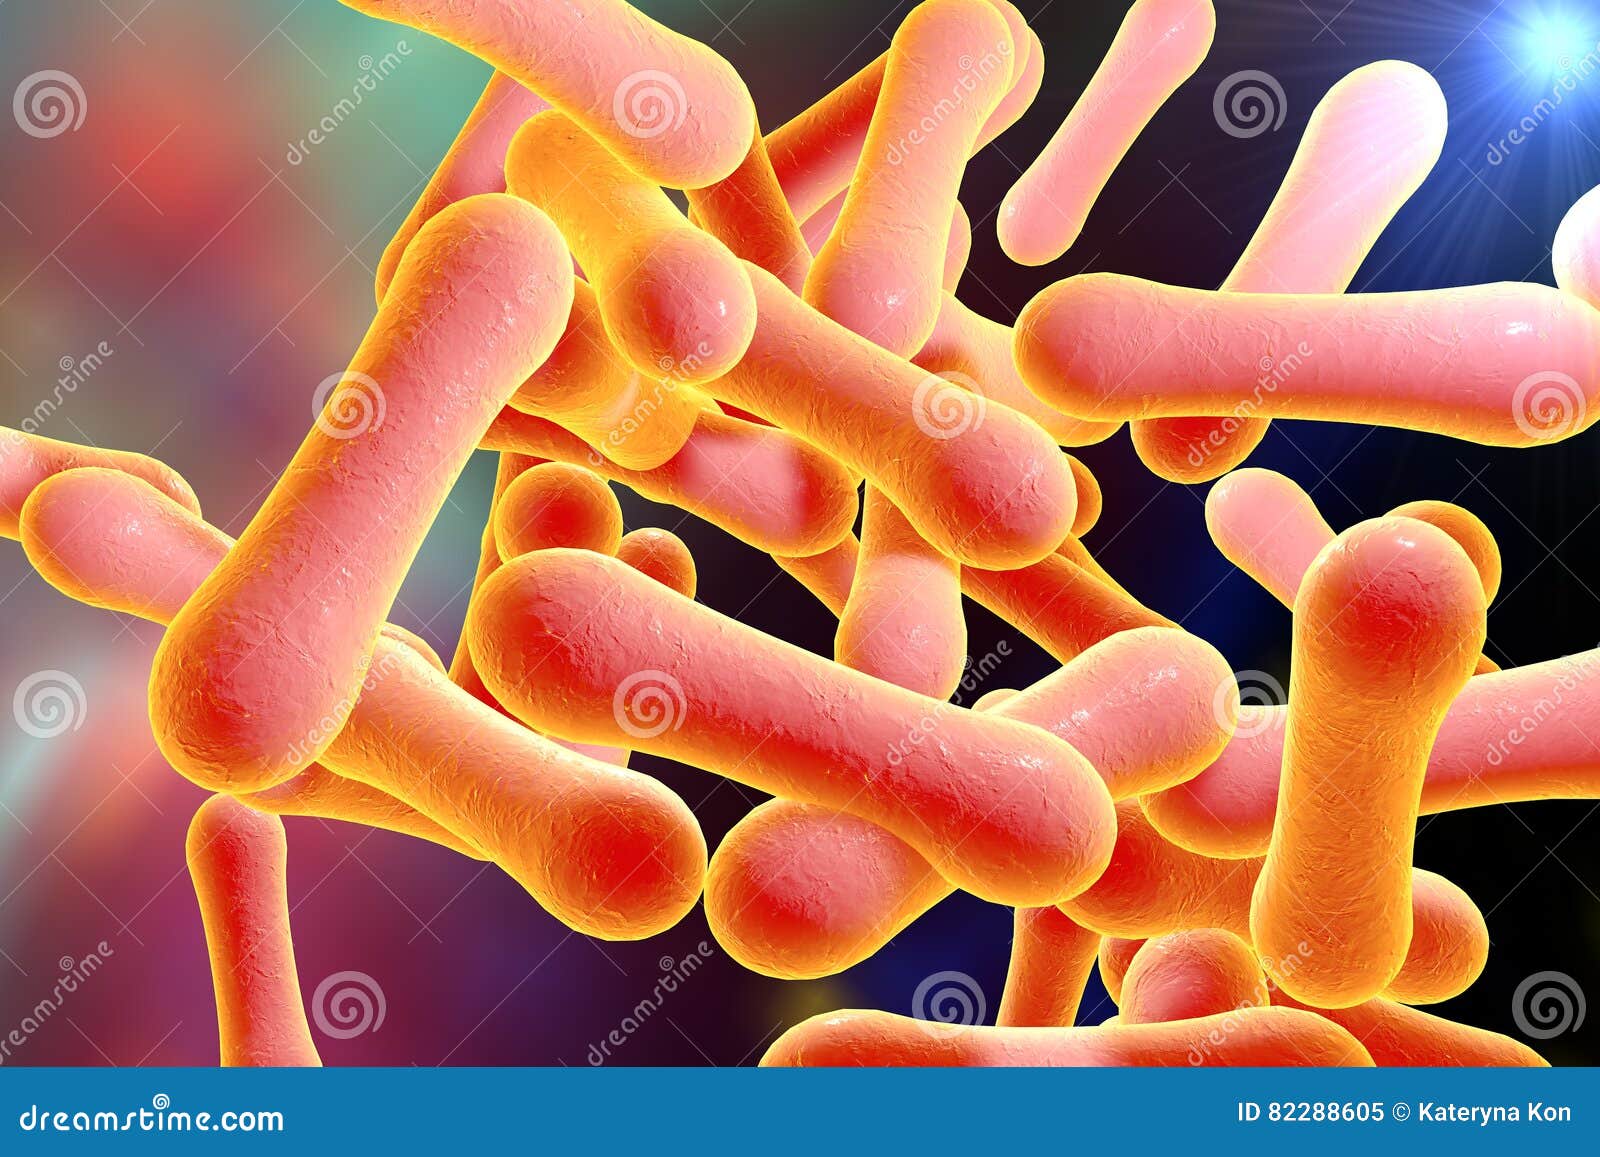 bacteria which cause diphtheria